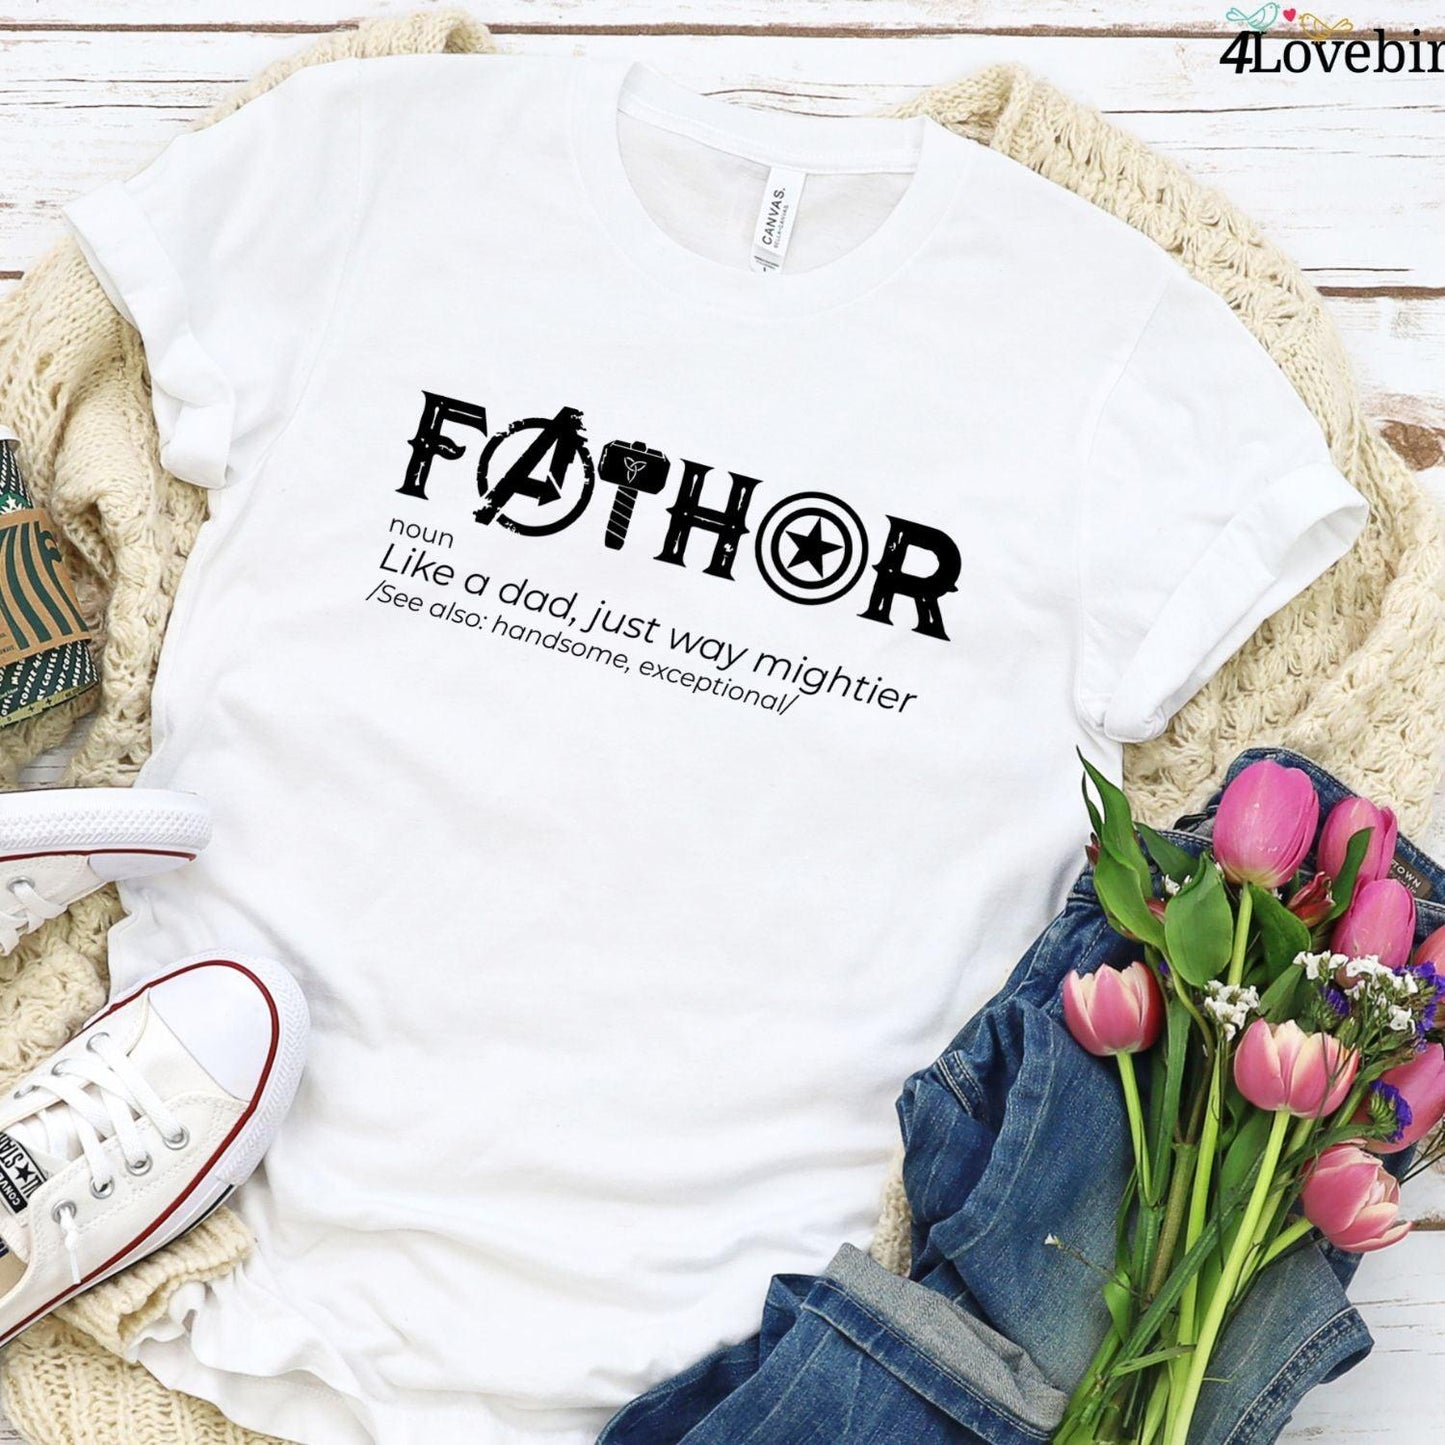 FaThor & MoThor Hilarious Avengers-Inspired Matching Outfits - Perfect for Couples - 4Lovebirds